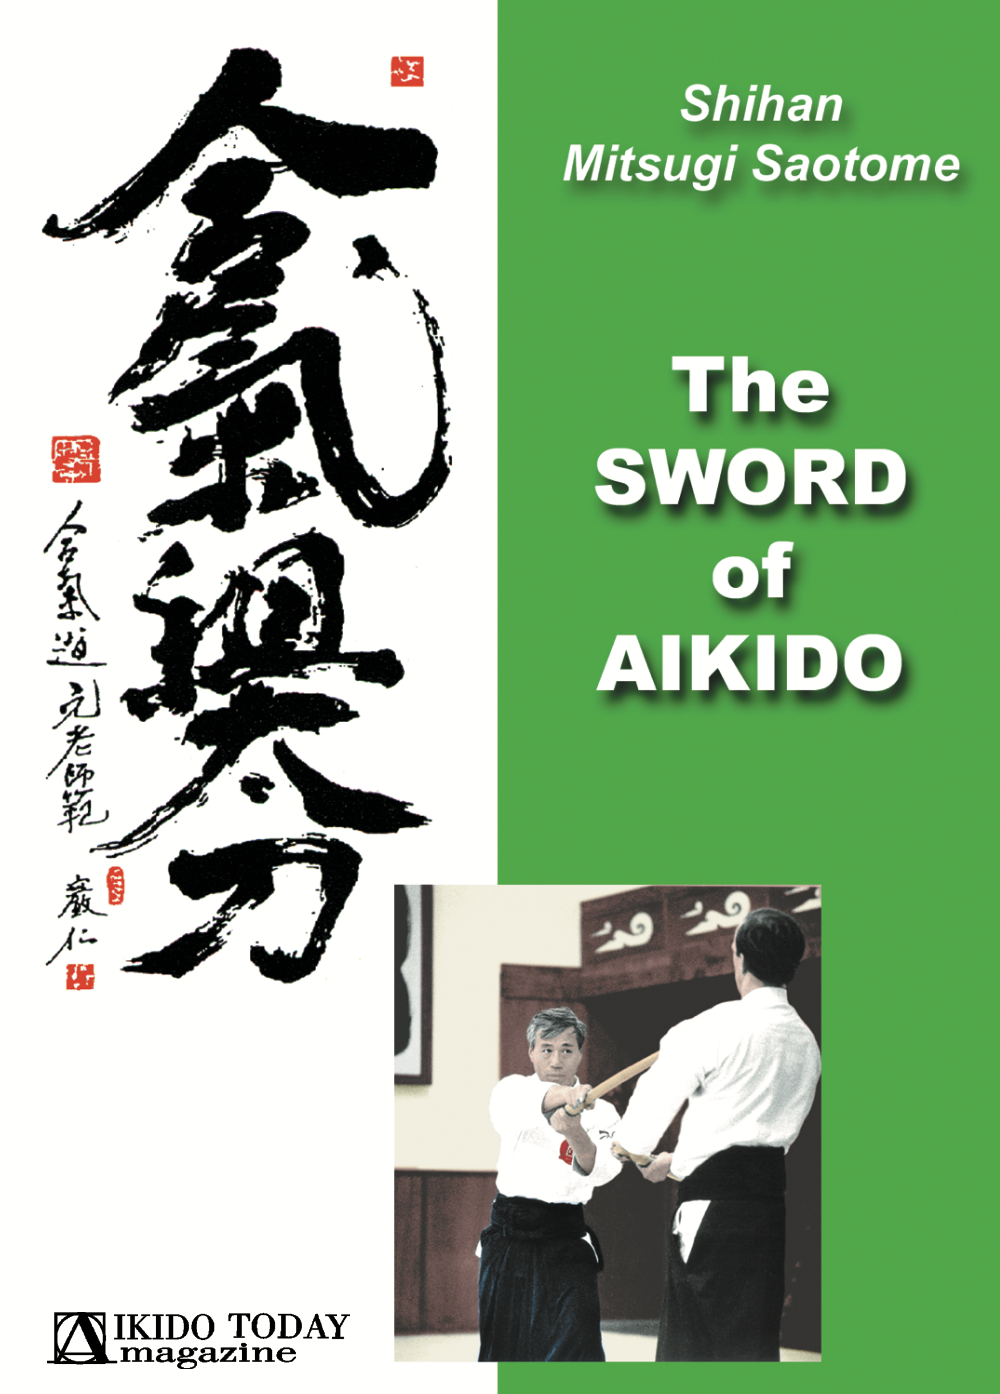 The Sword of Aikido DVD by Mitsugi Saotome